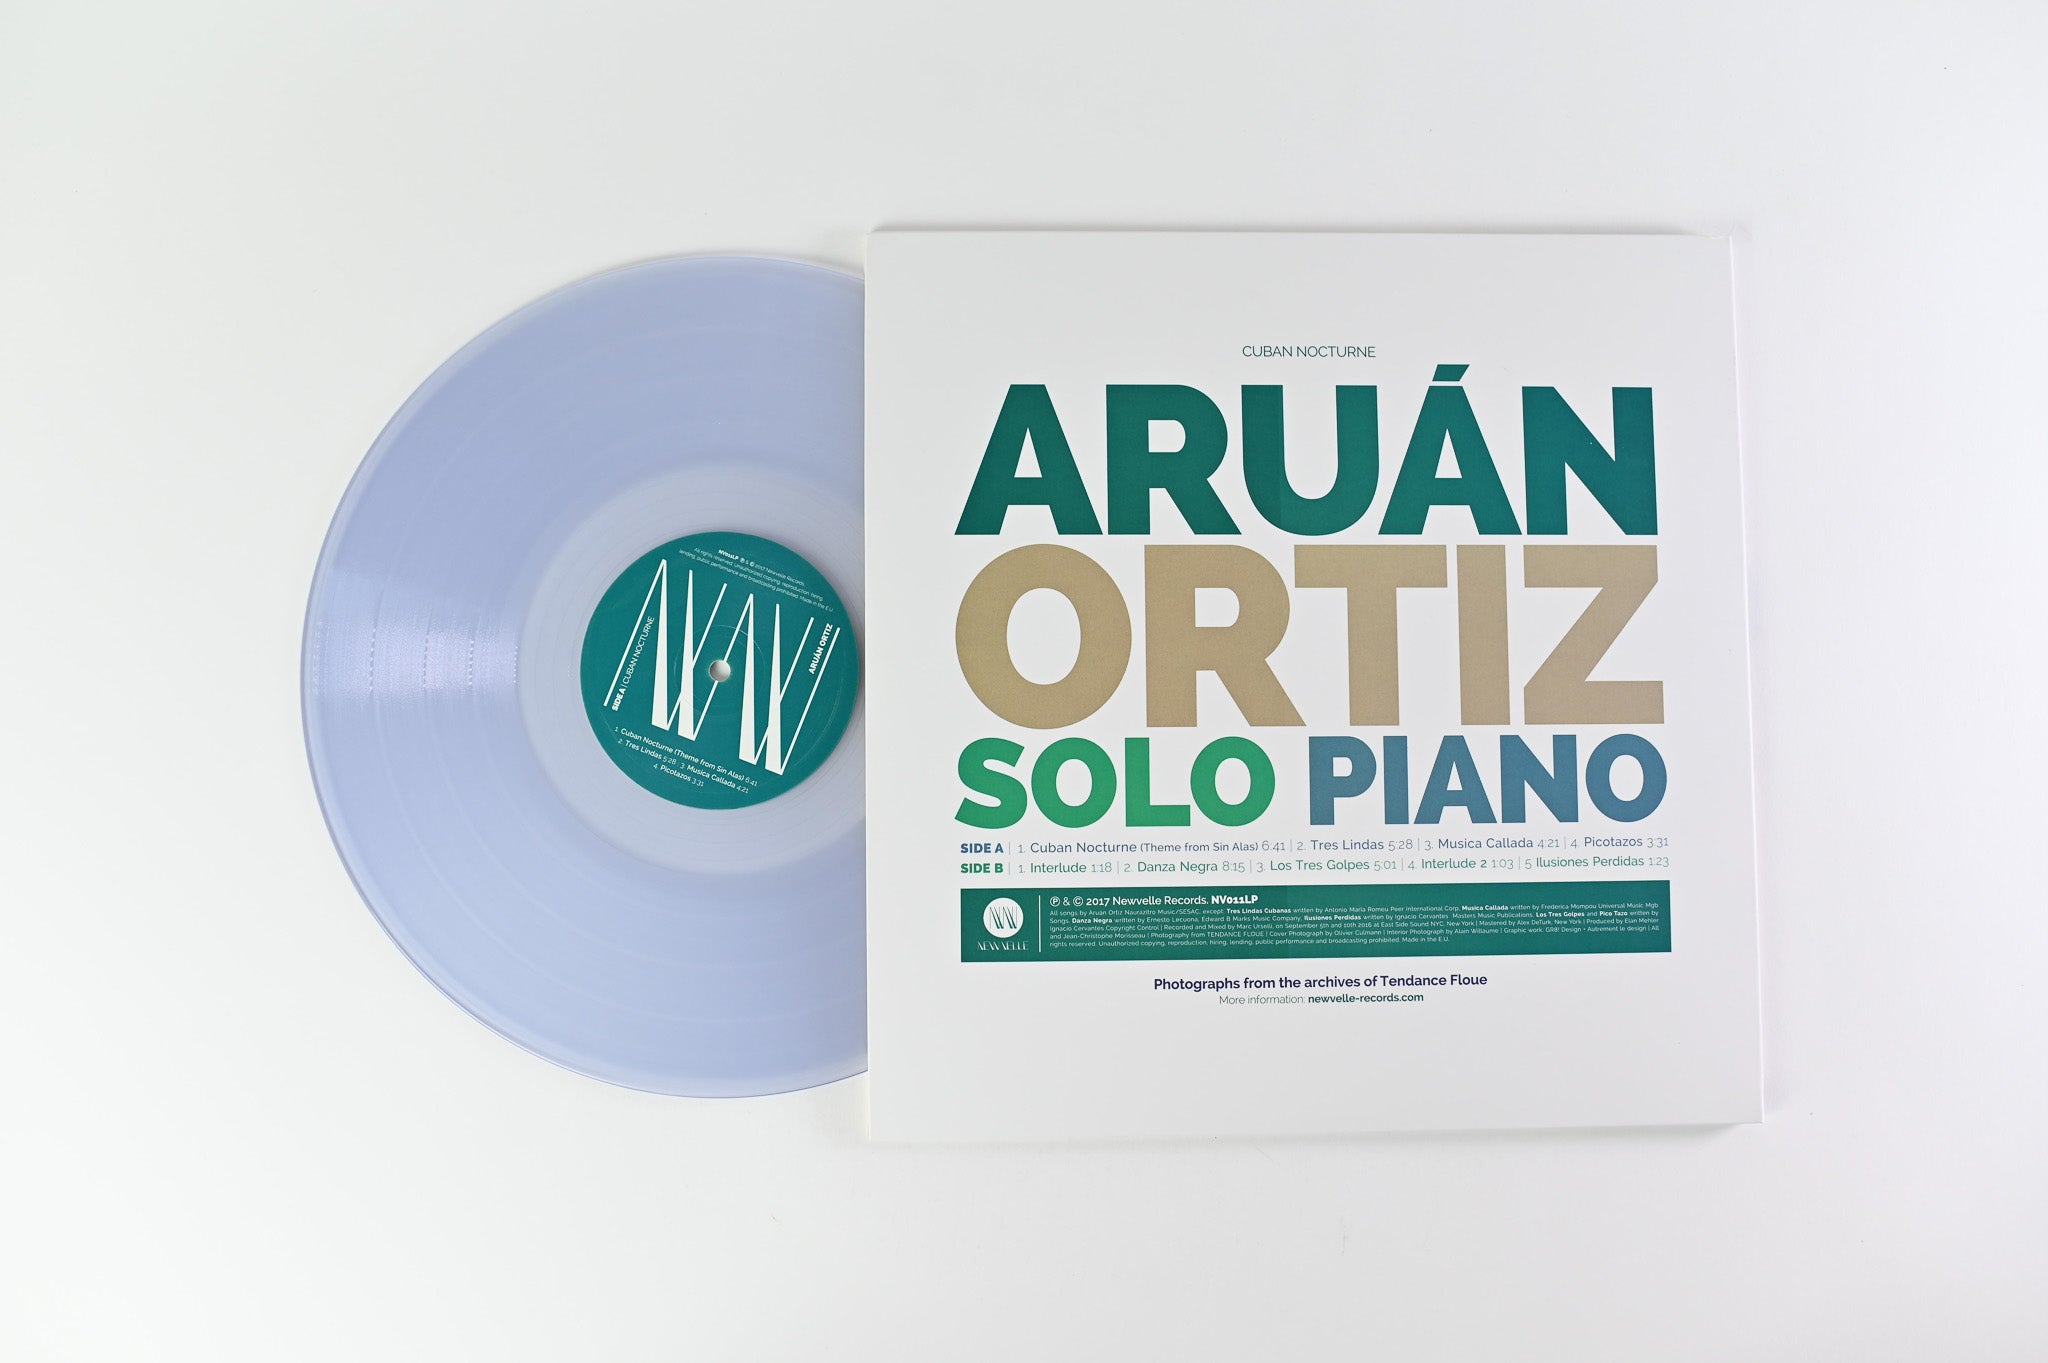 Aruán Ortiz - Cuban Nocturne on Newvelle Records - Clear Vinyl